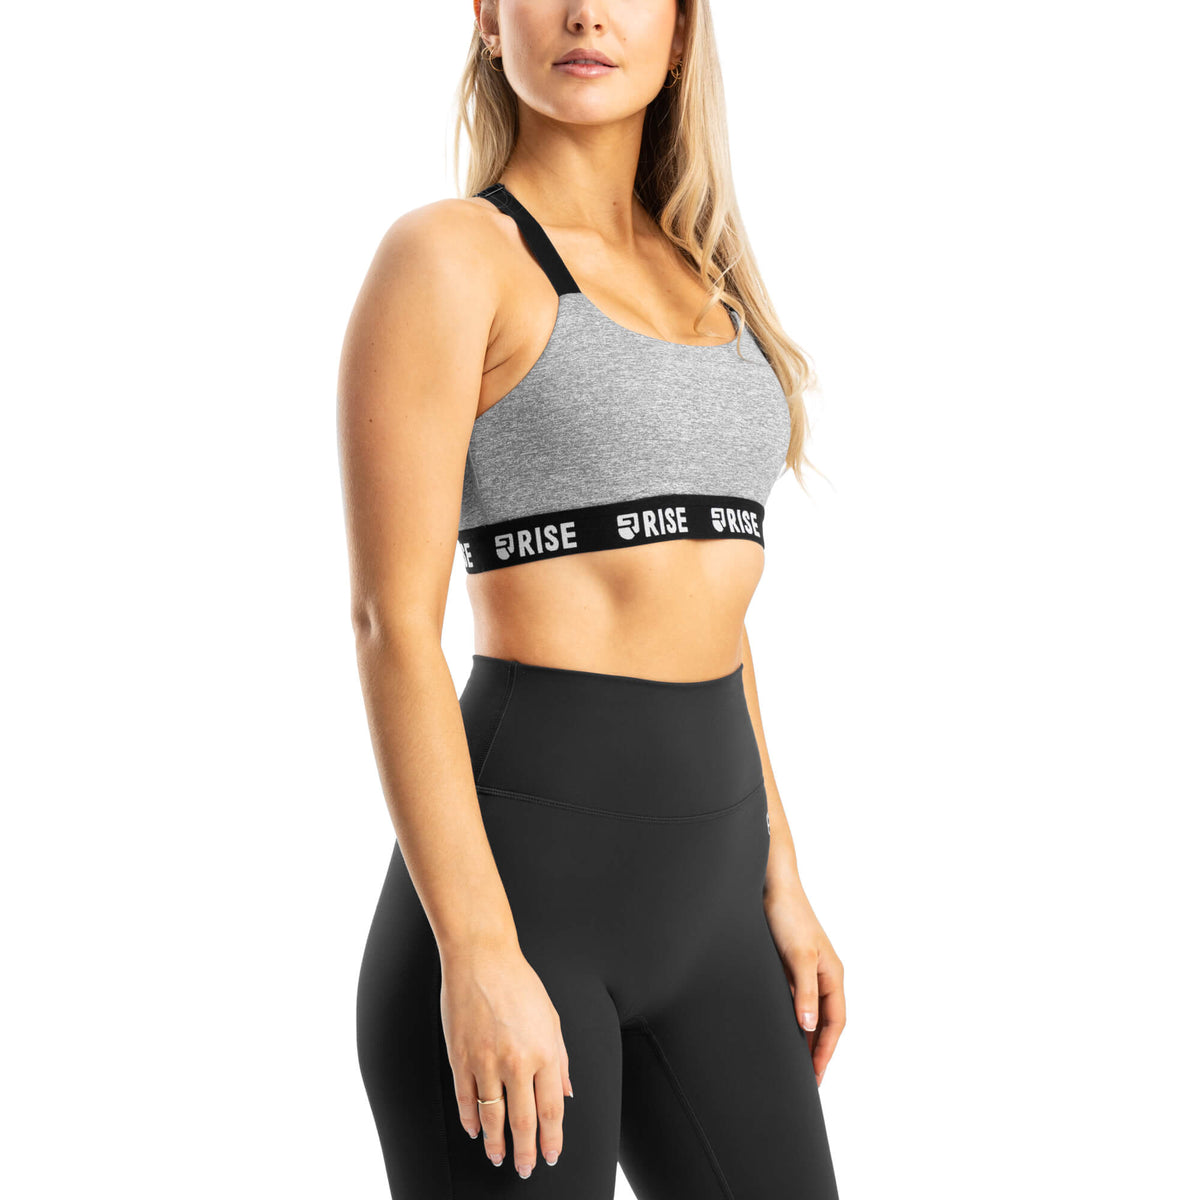 Shop Sports Direct Strappy Sports Bra for Women up to 90% Off